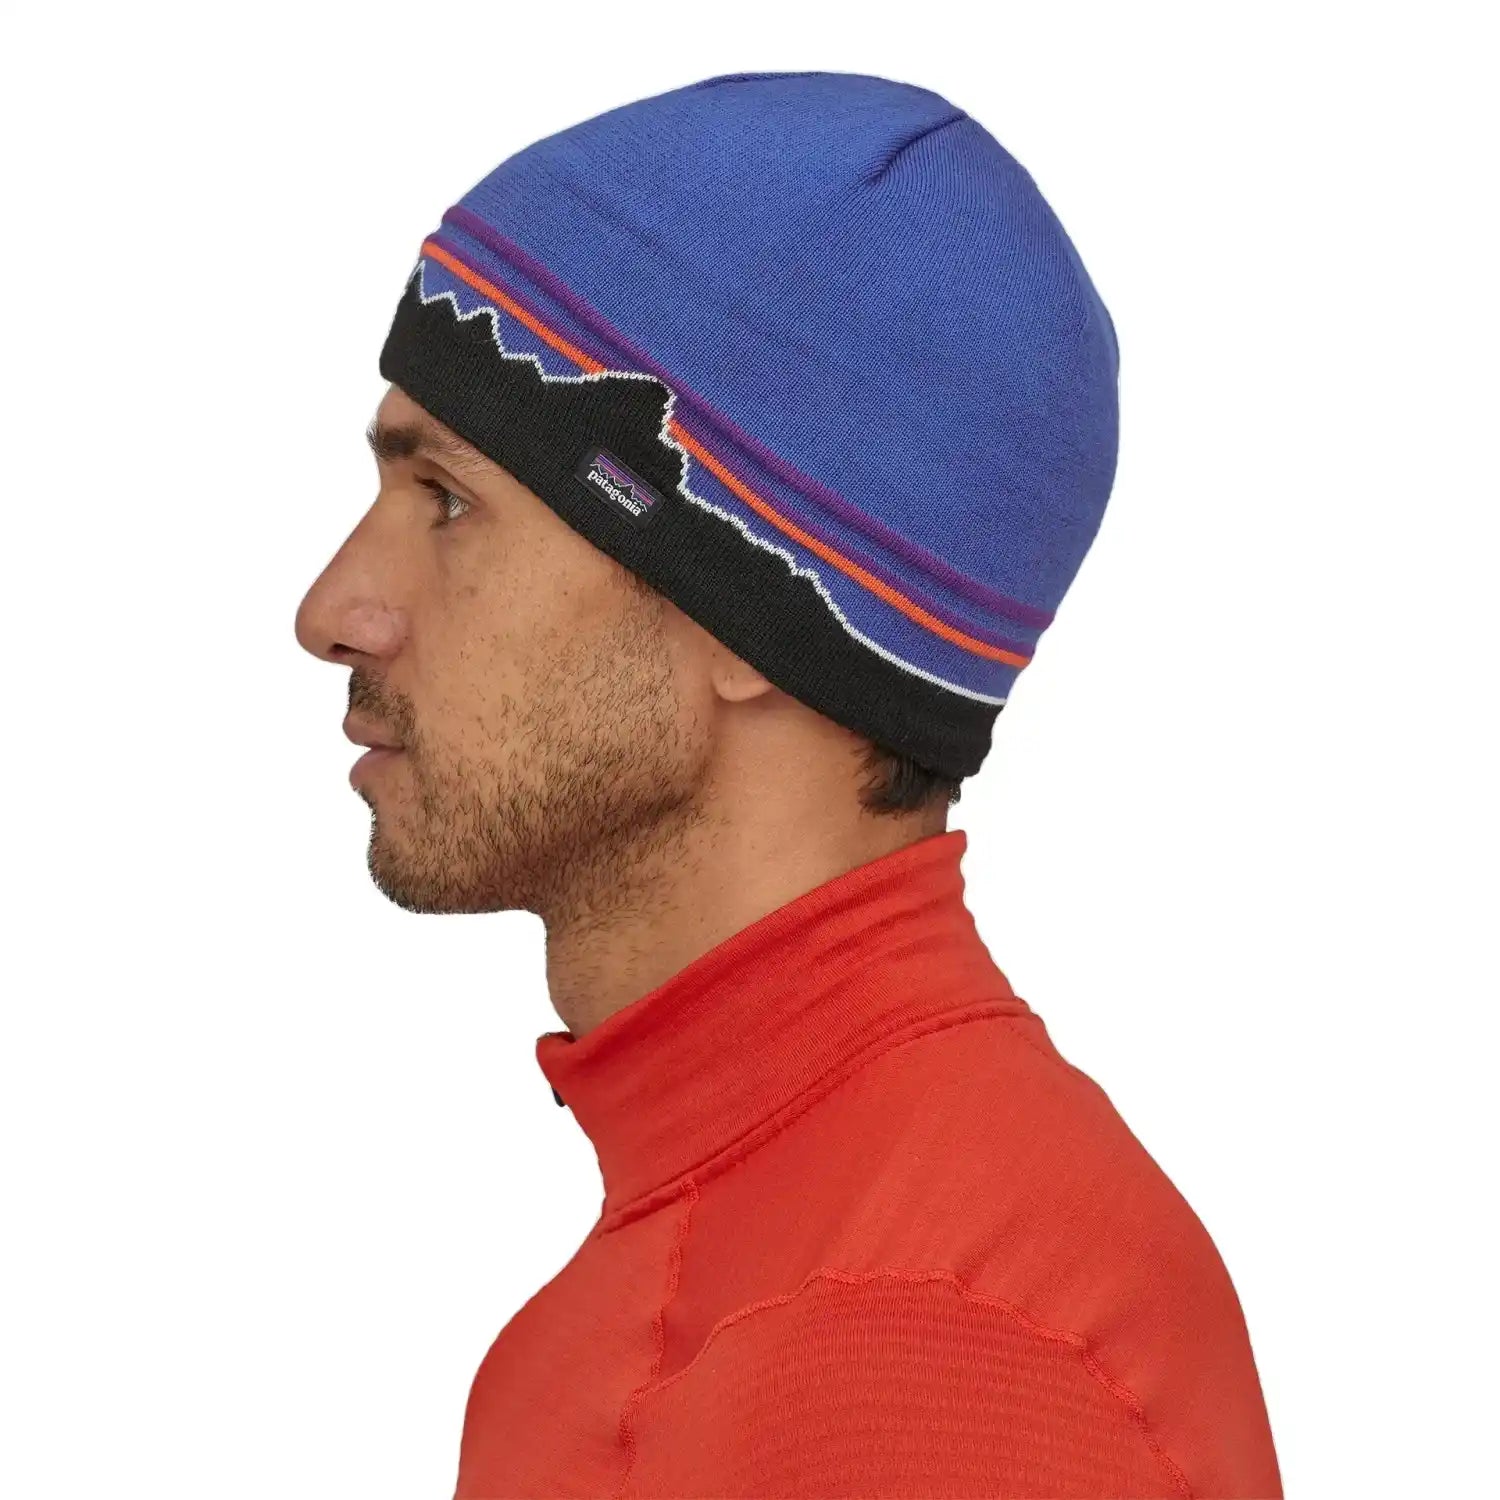 Patagonia Beanie Hat, Classic Fitz Roy Andes Blue, side view on model